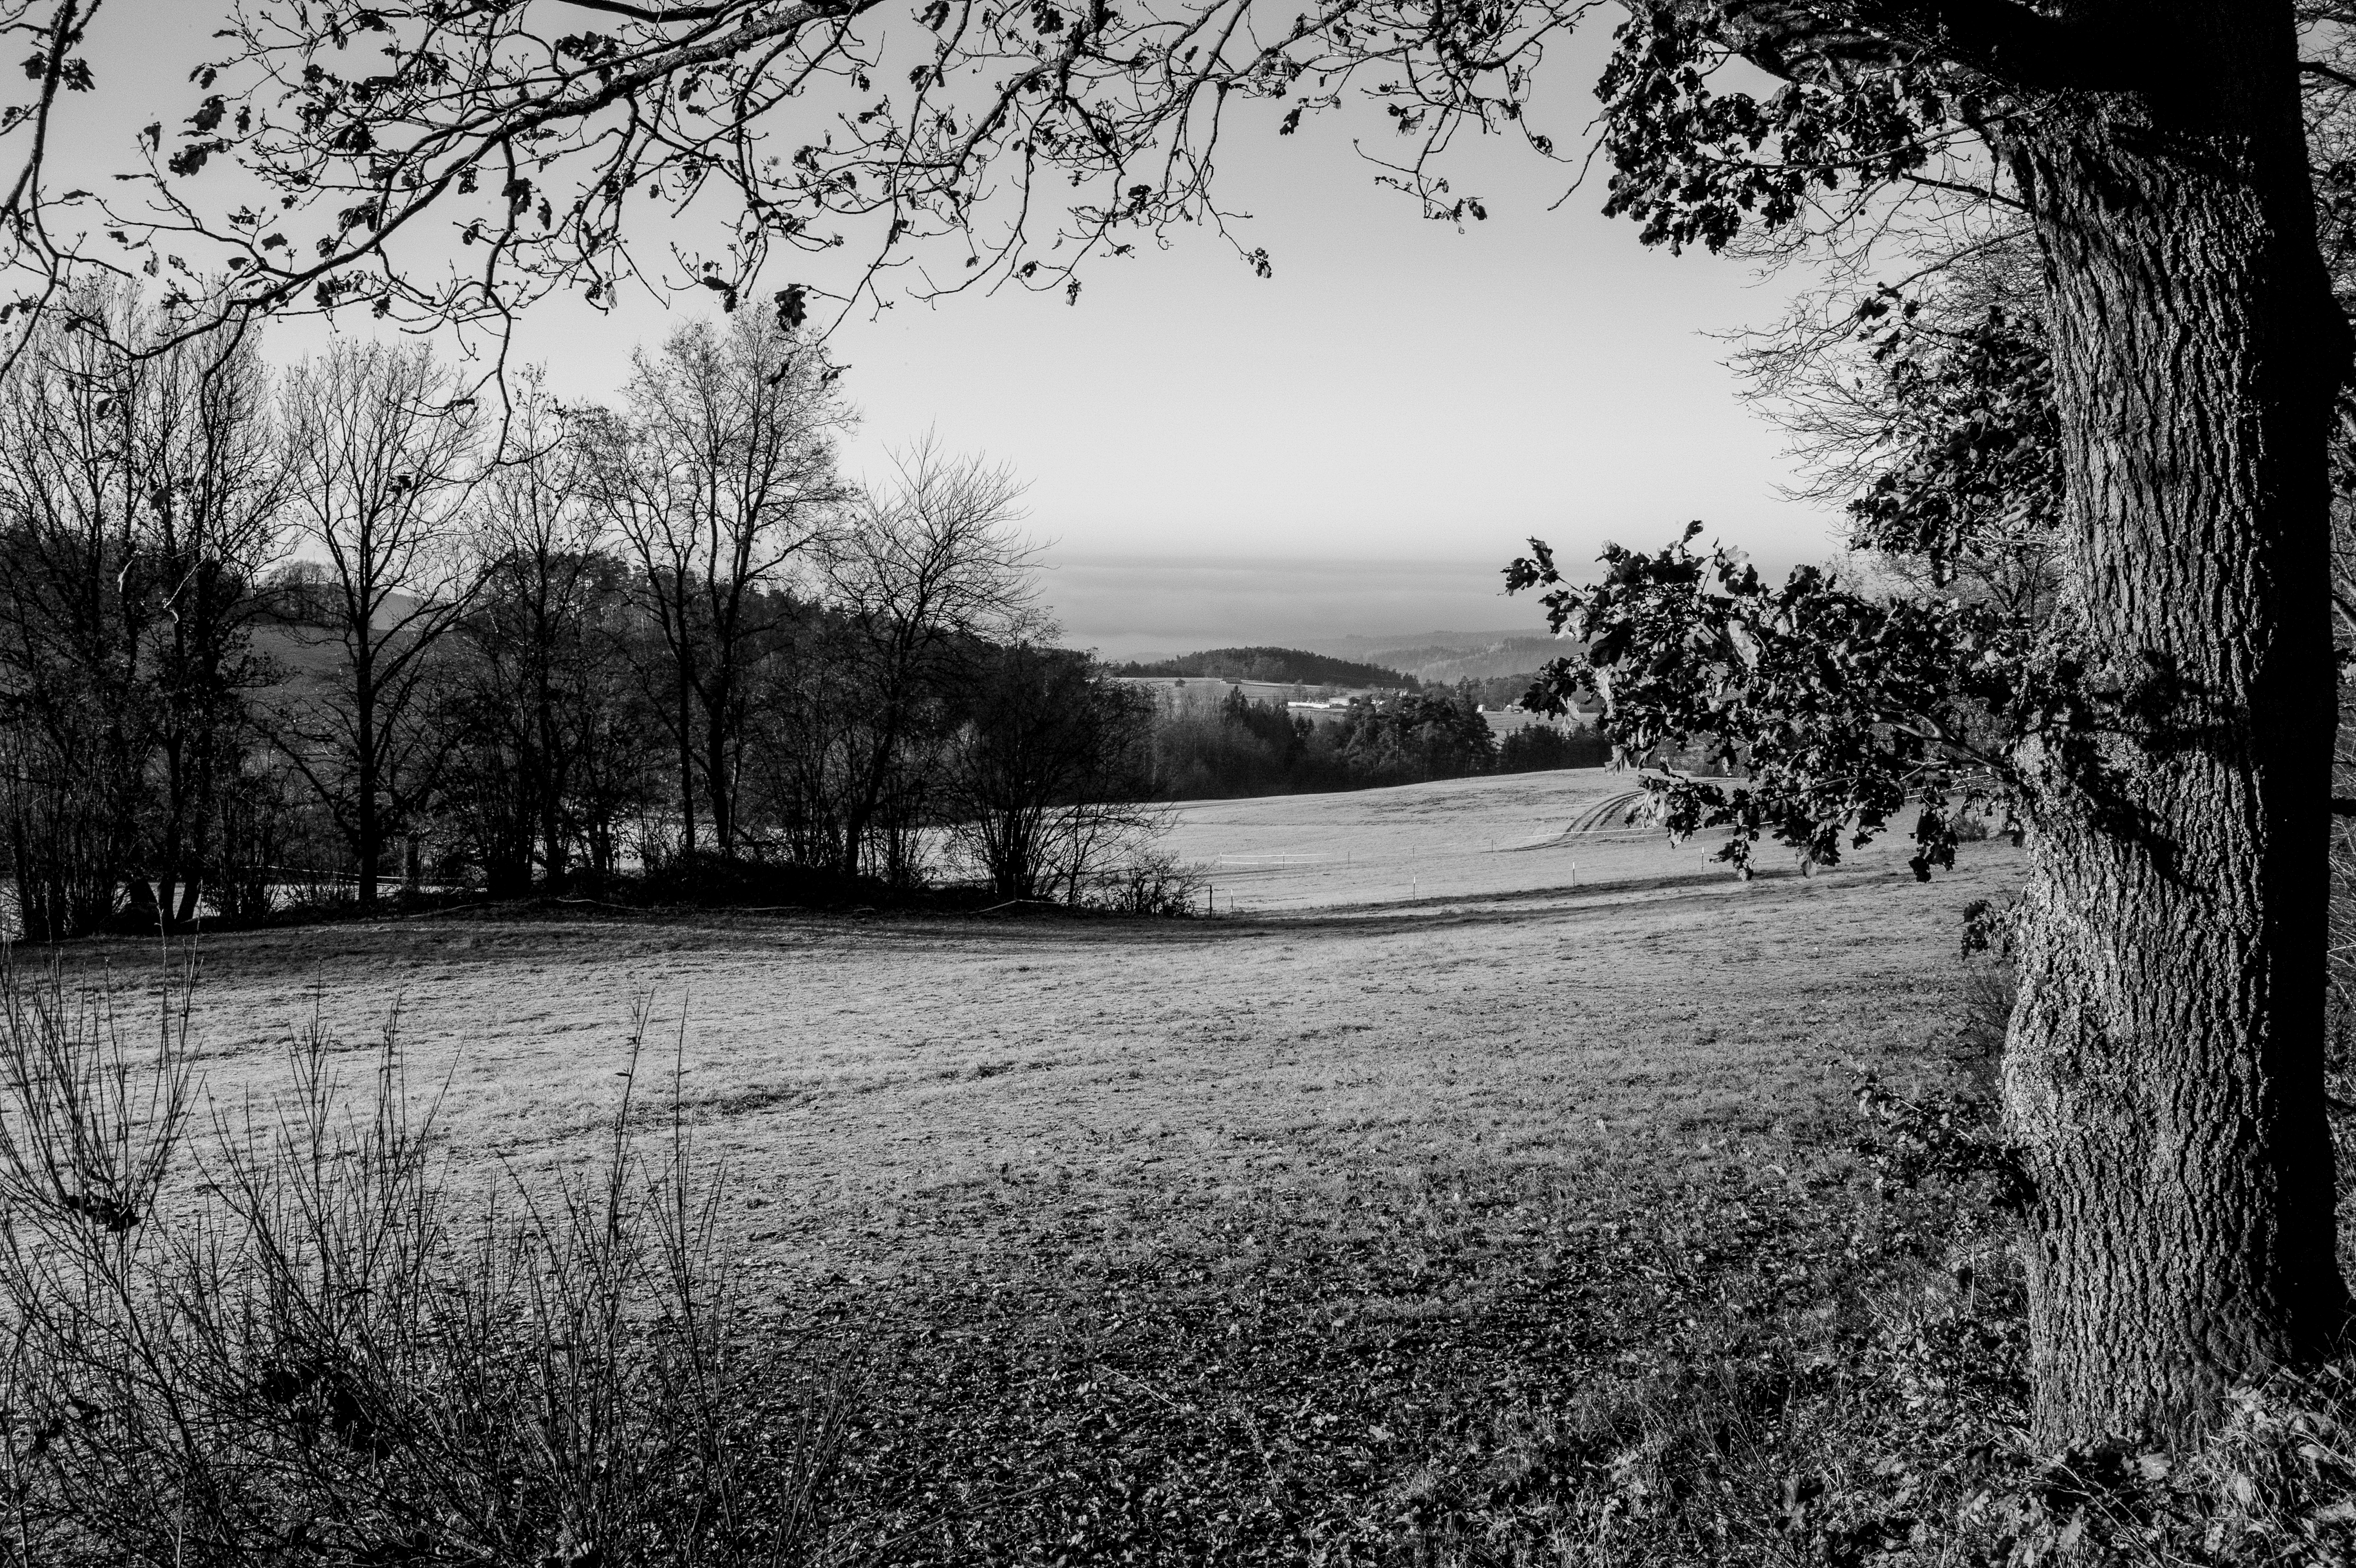 lawn, landscape, nature, trees, hills, bw, chb cellphone